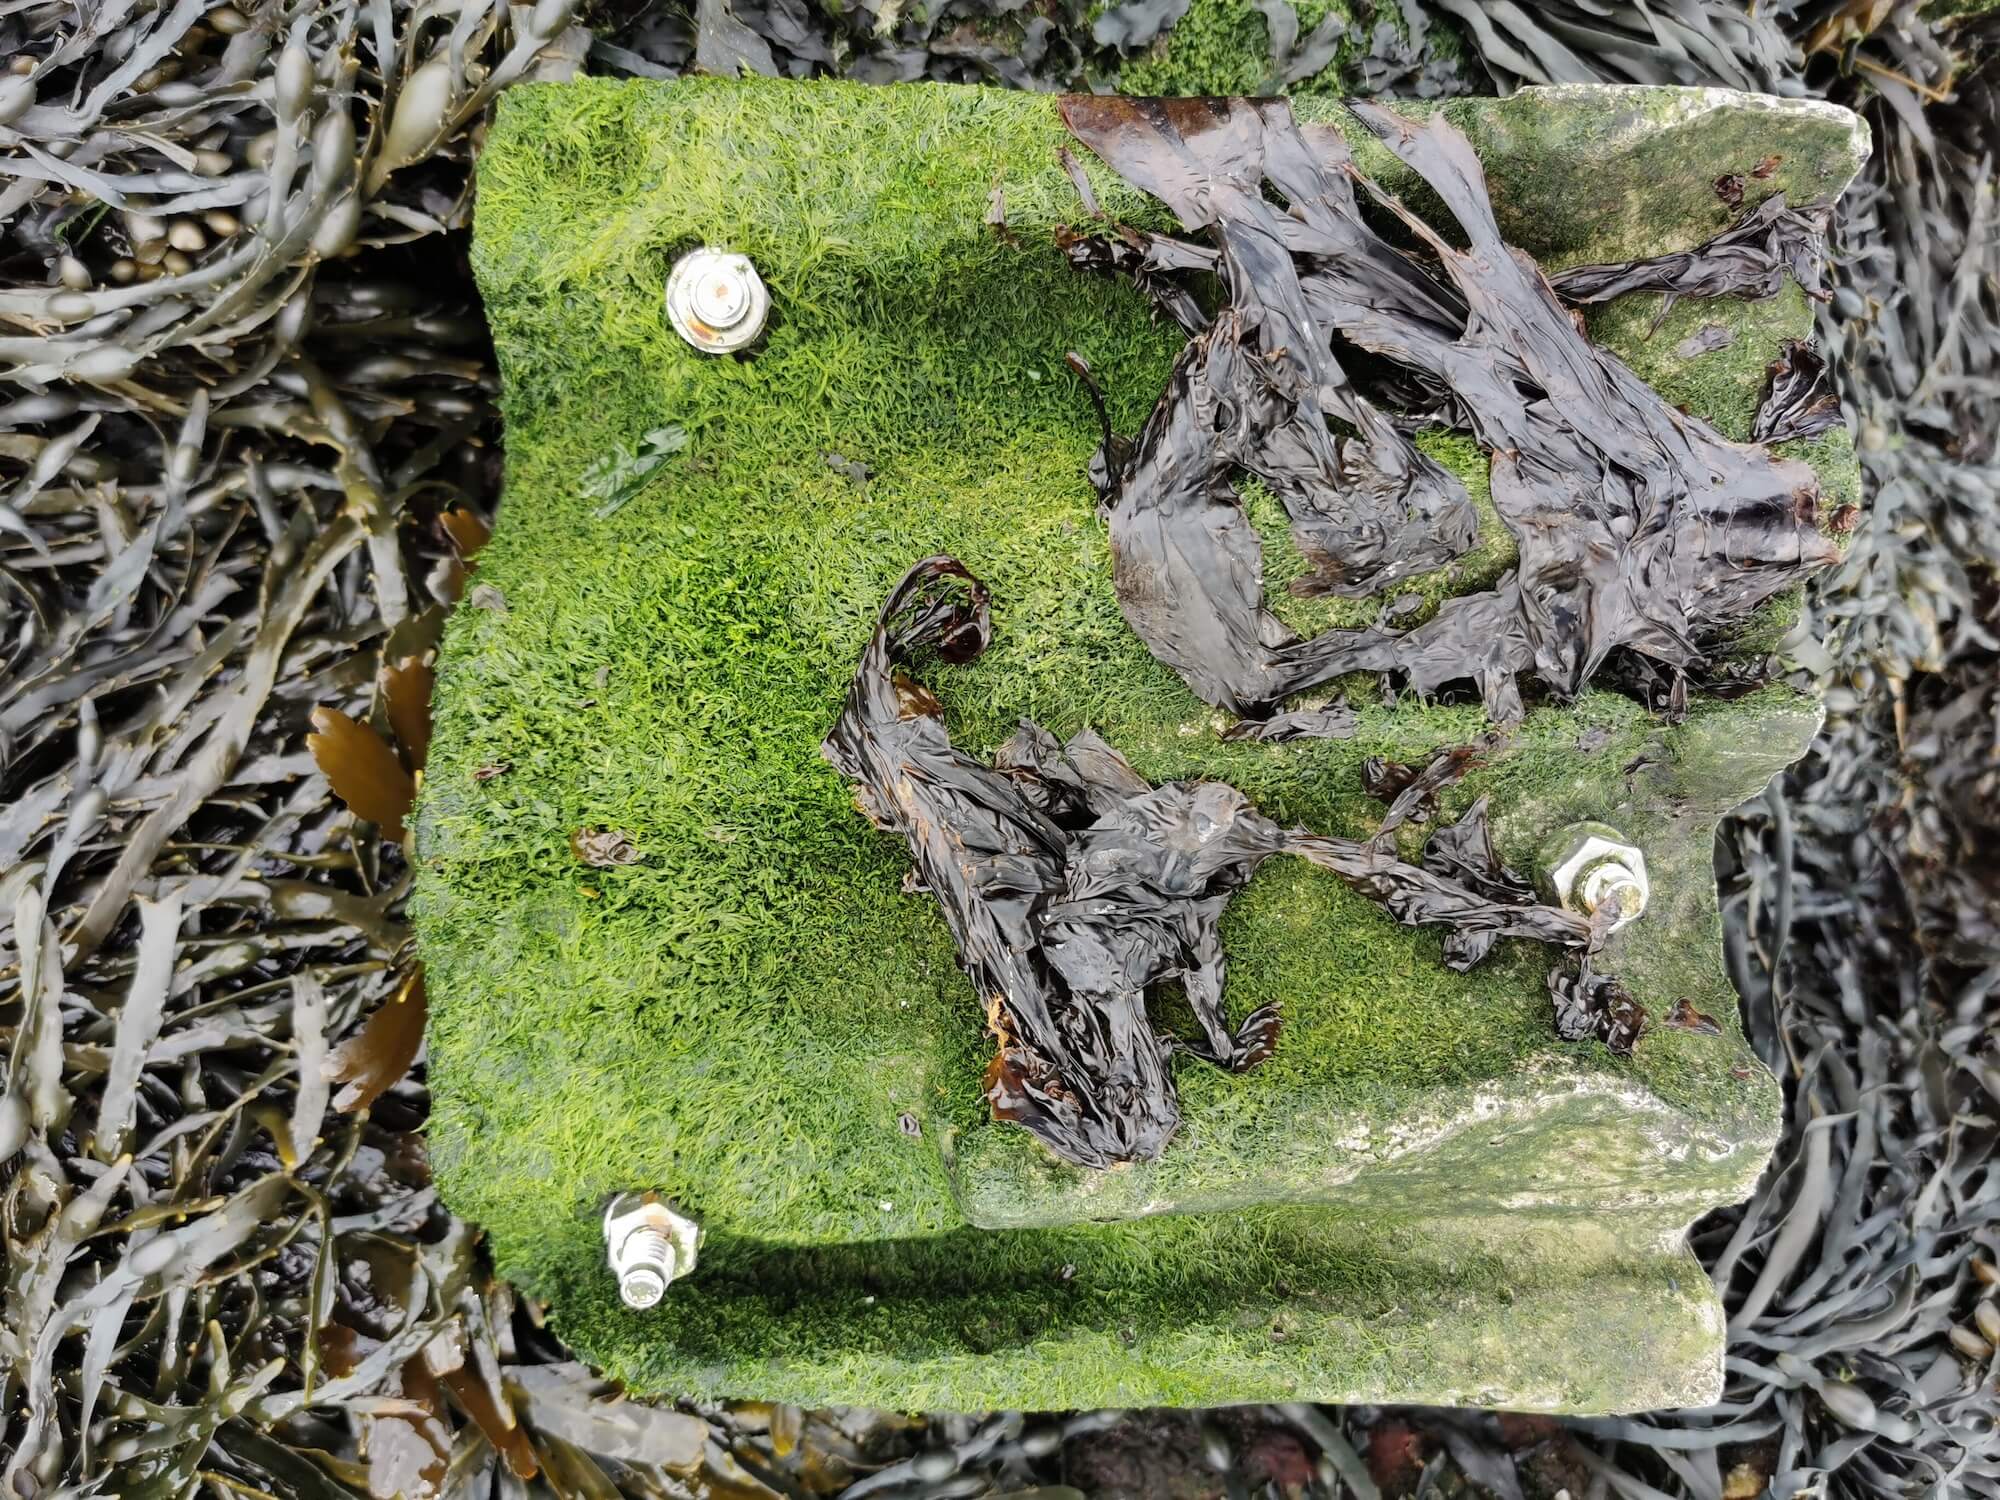 A eco-engineered tile designed by Ecostructure researchers is colonised by seaweed after several months.